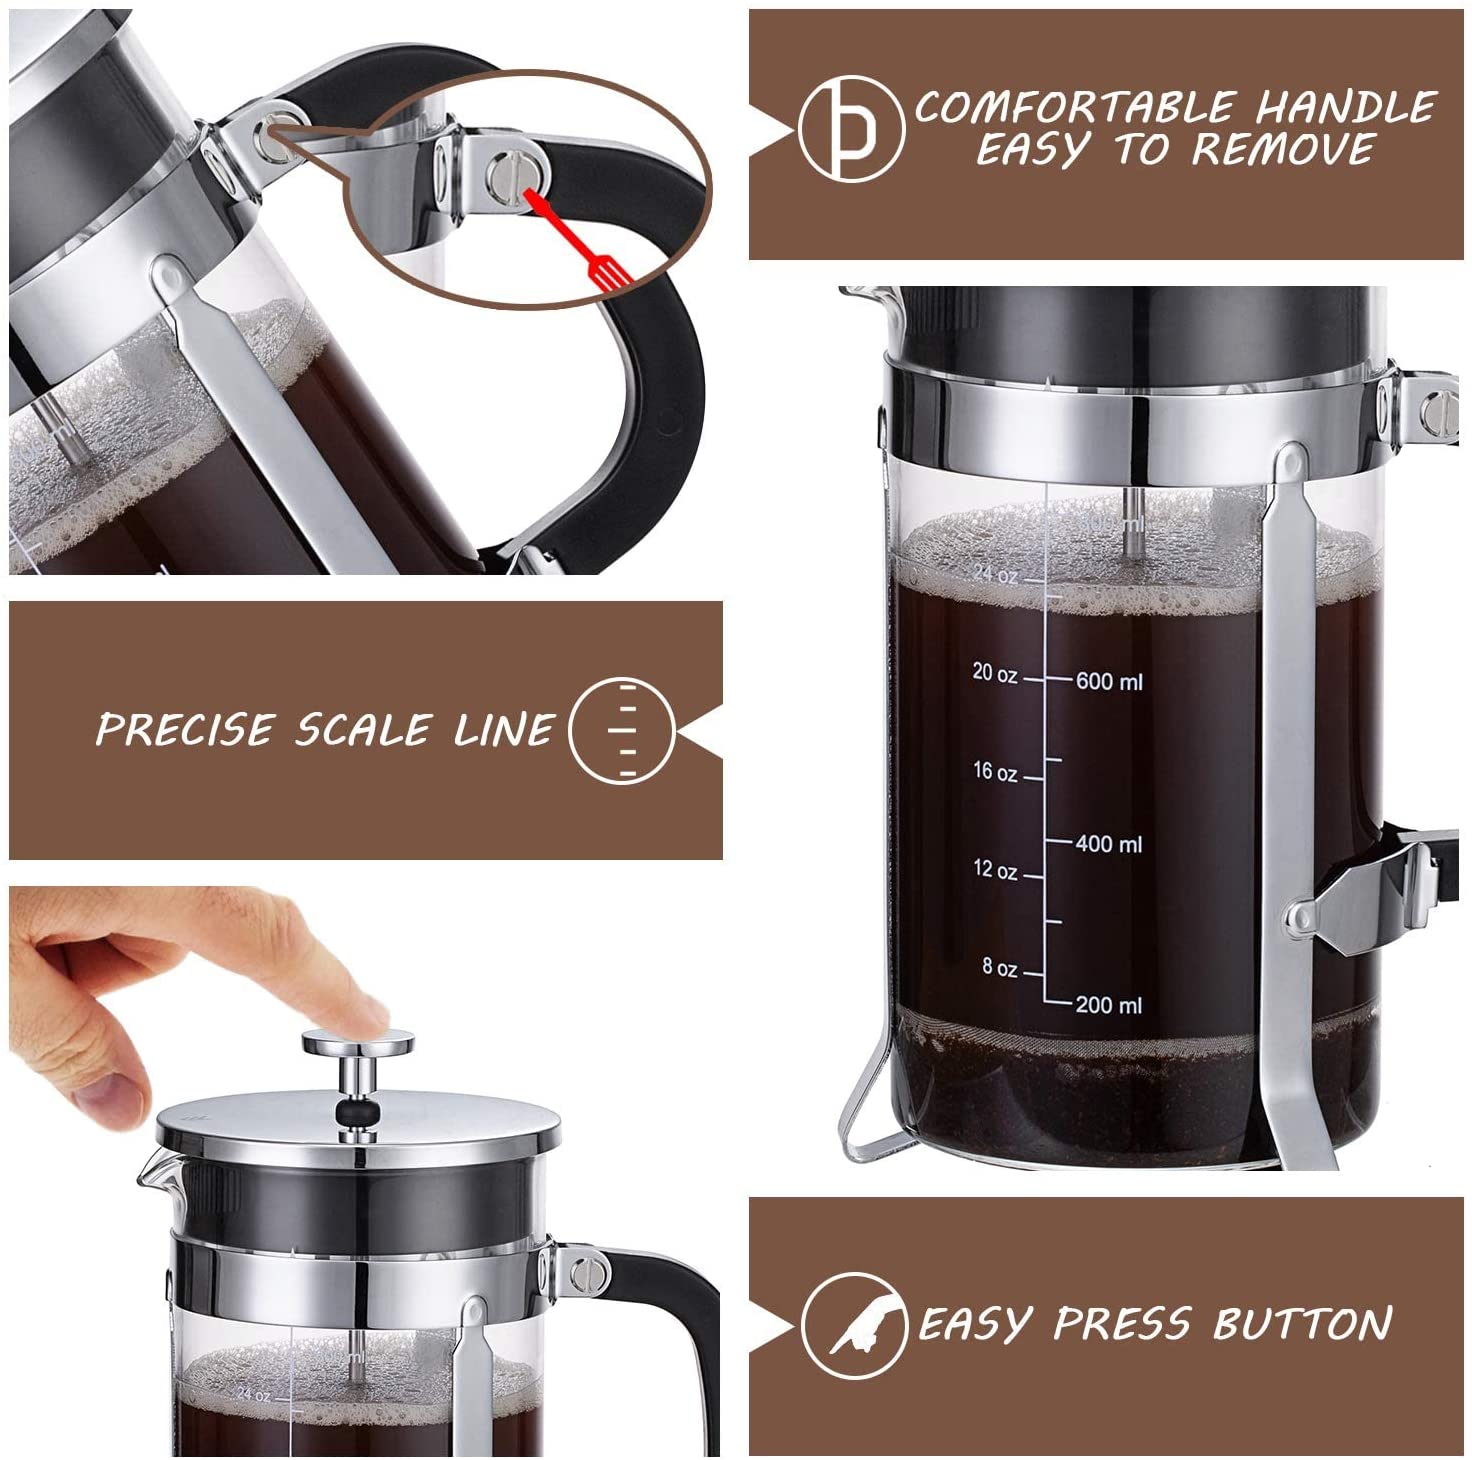 French Press Coffee Maker (34 oz) with 4 Filters - 304 Durable Stainless  Steel,Heat Resistant Borosilicate Glass Coffee Press,BPA  Free,Silver（include